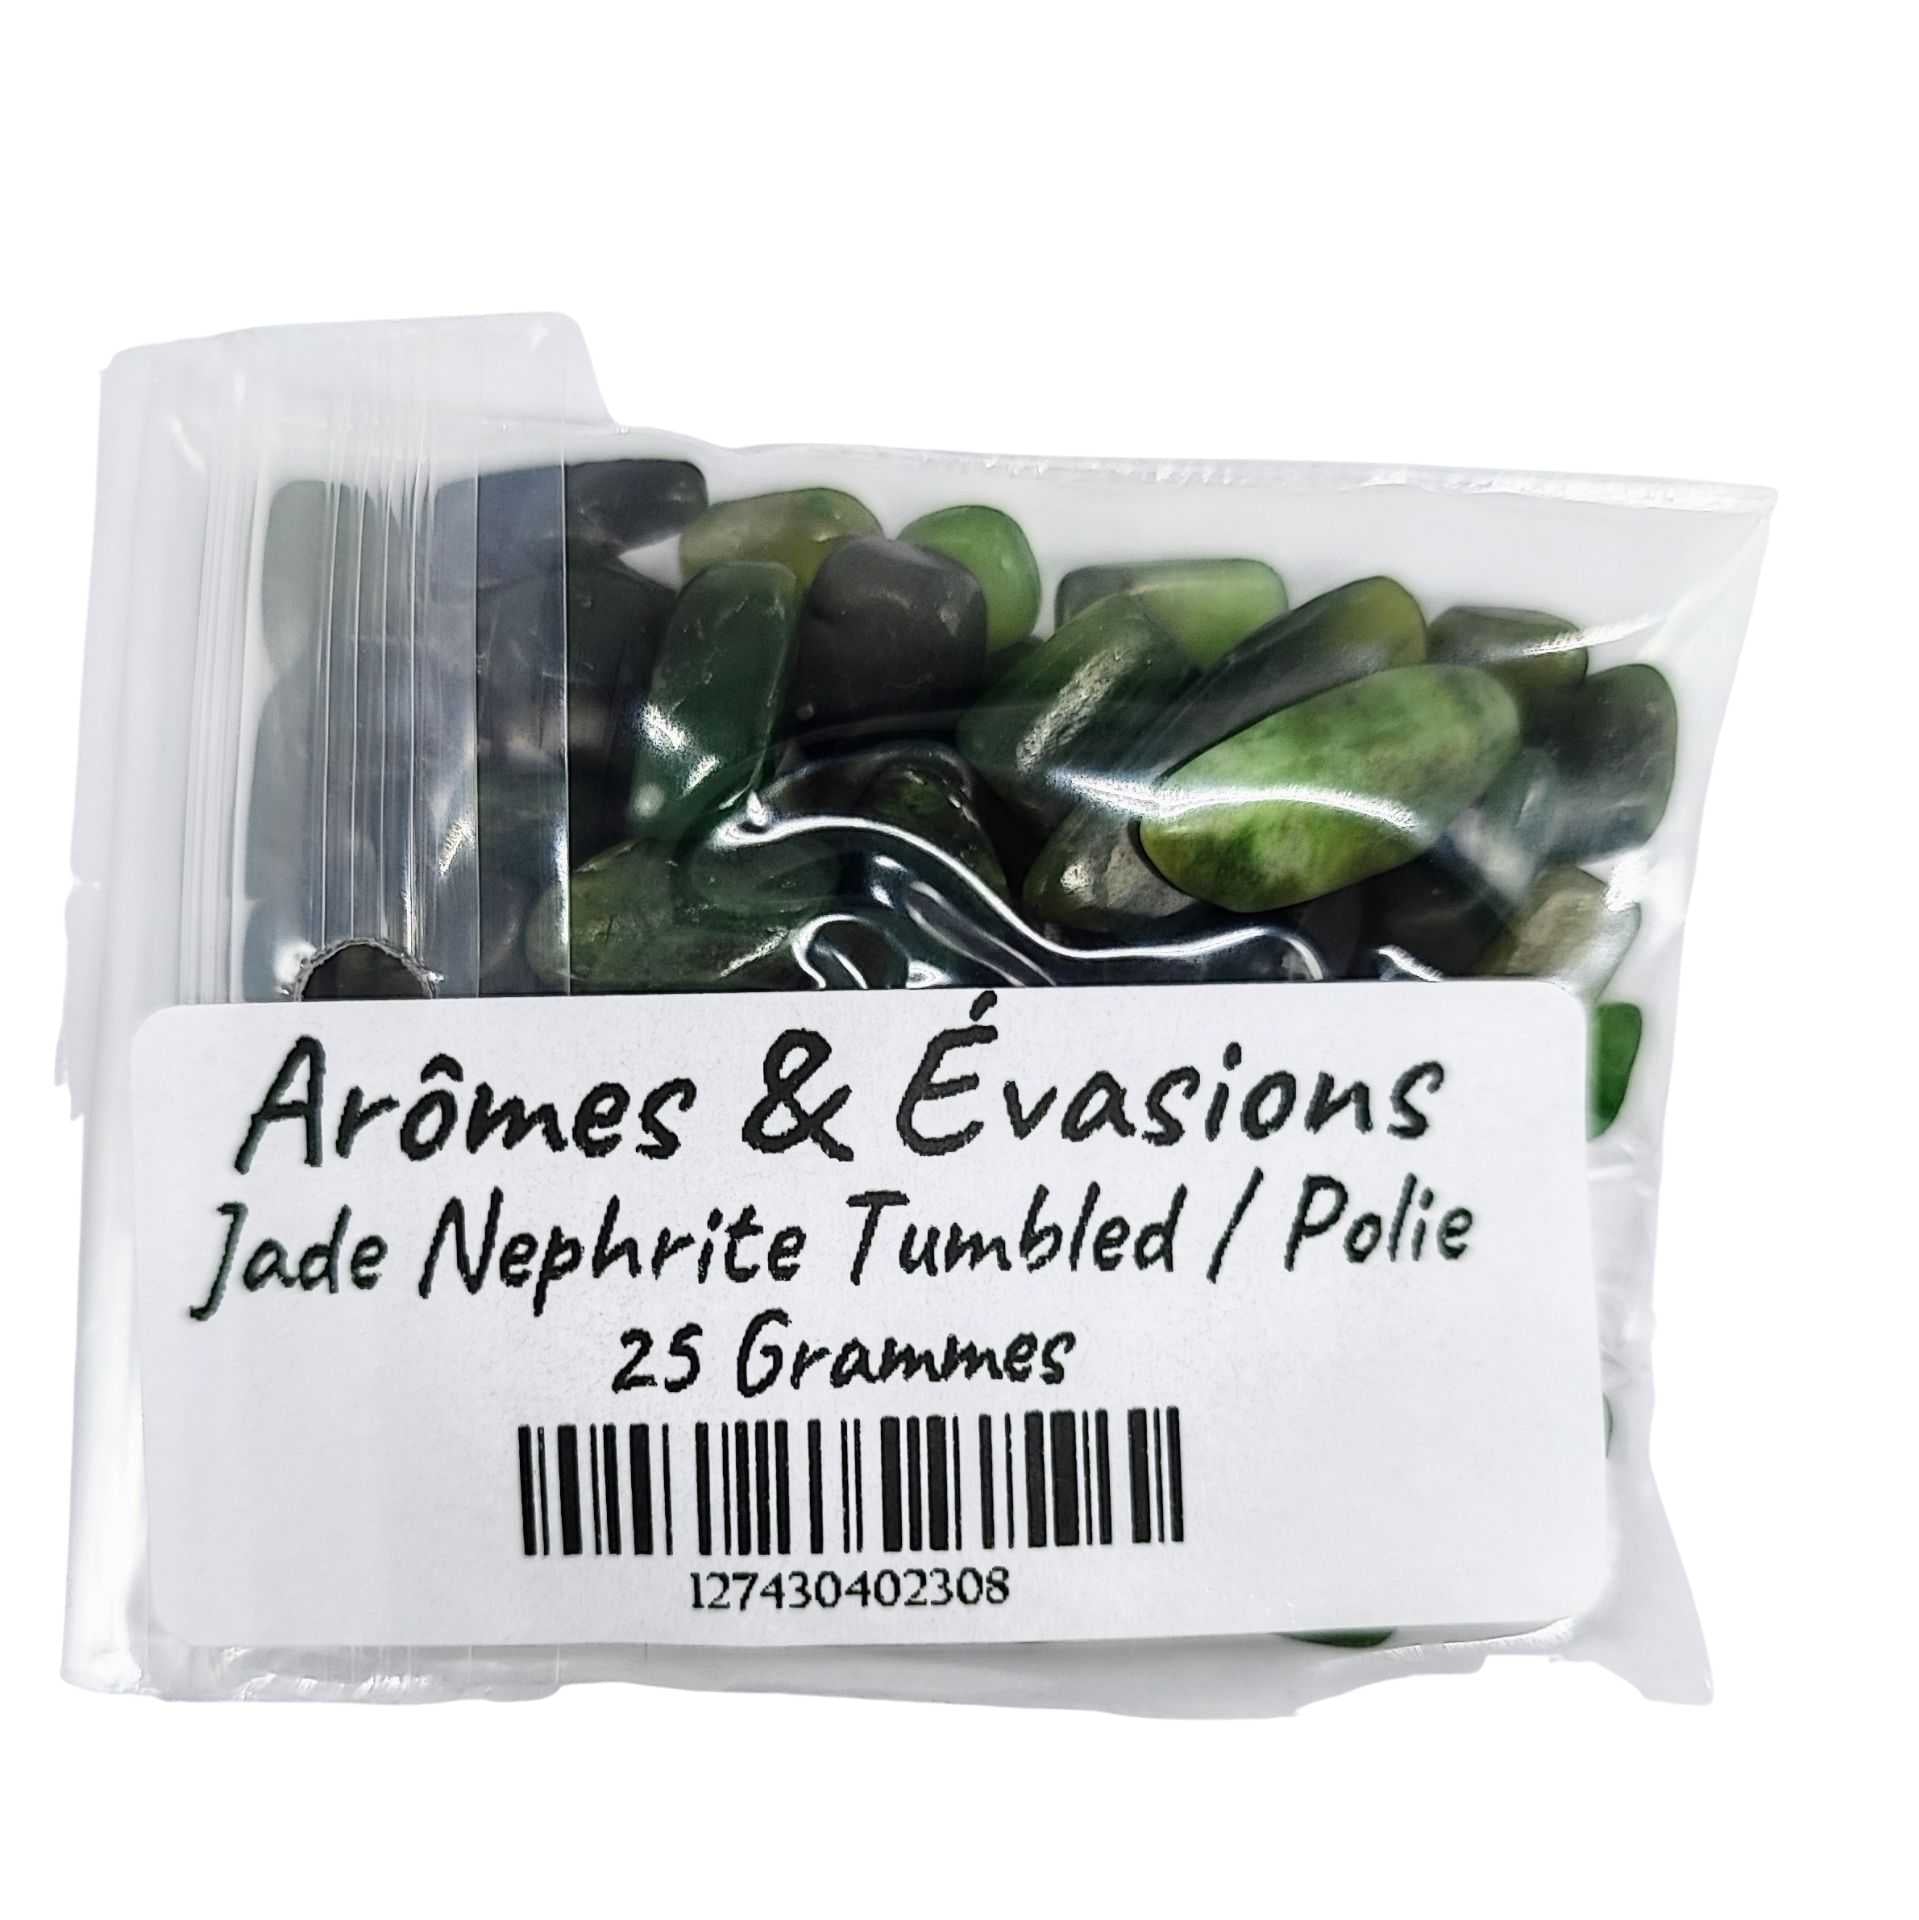 Stone -Tumbled Chips -Jade Nephrite -Chips -Aromes Evasions 